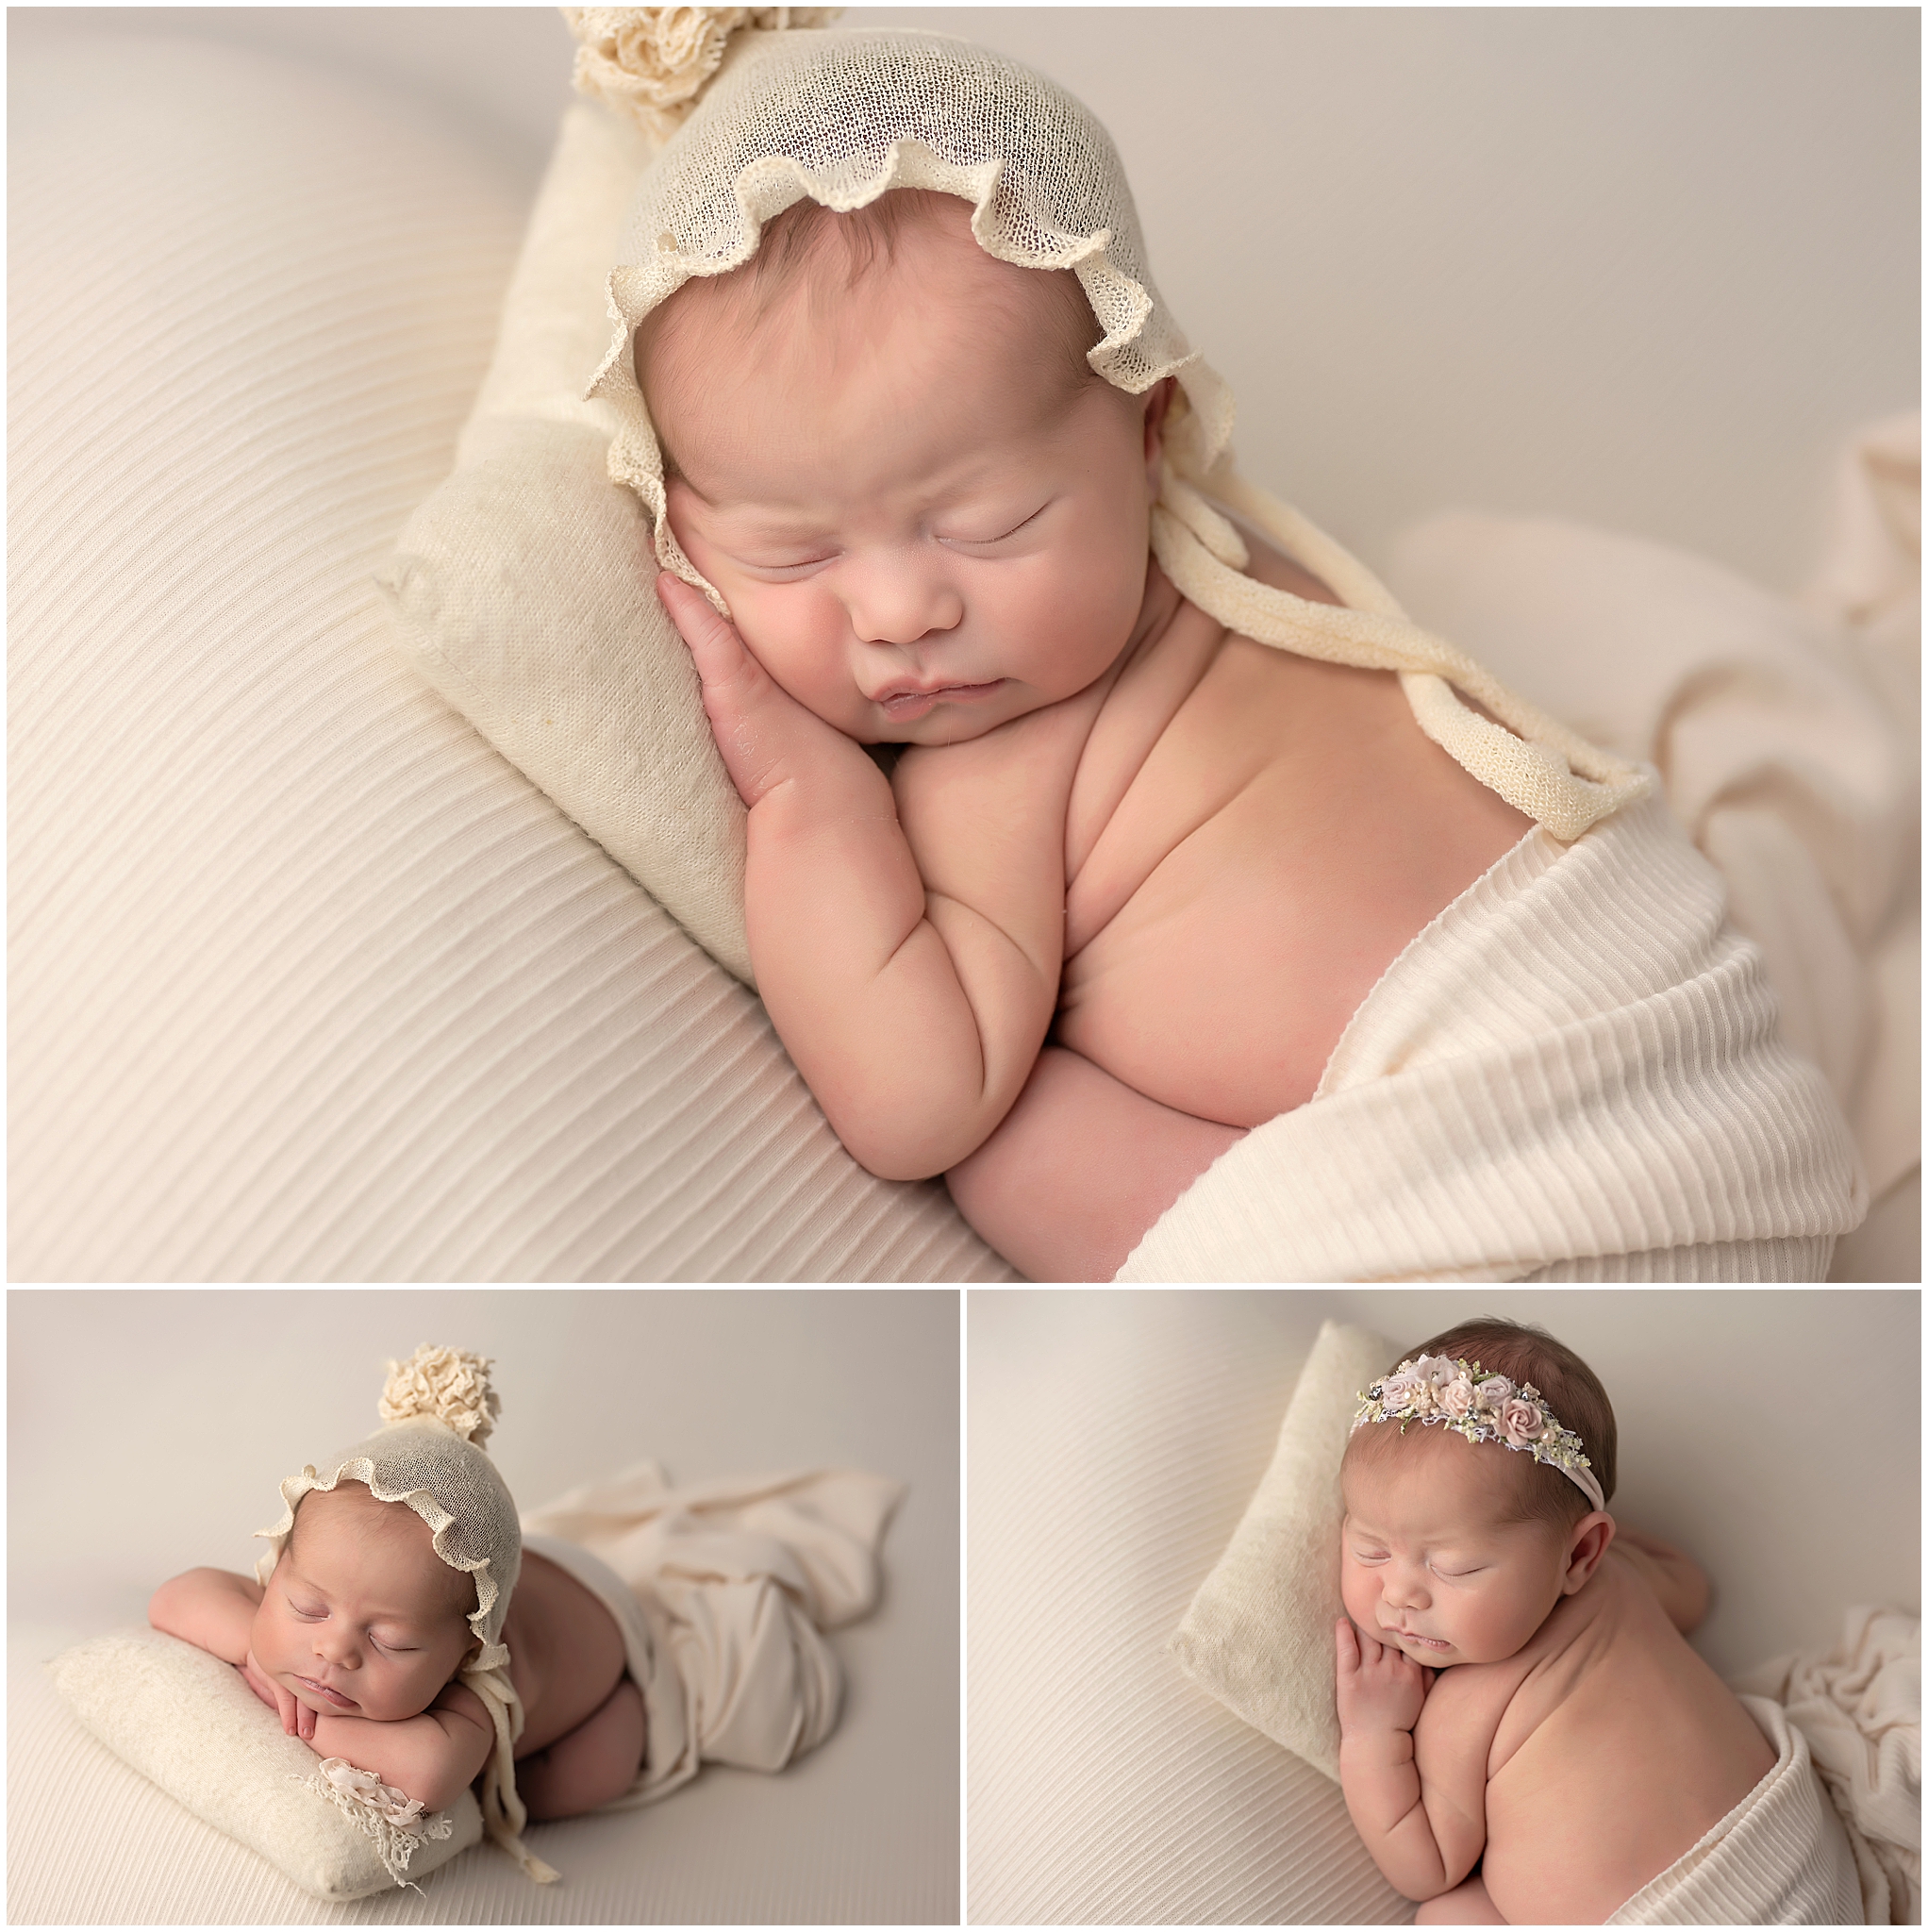 baby girl sleeping during newborn session at professional photography studio in london ontario